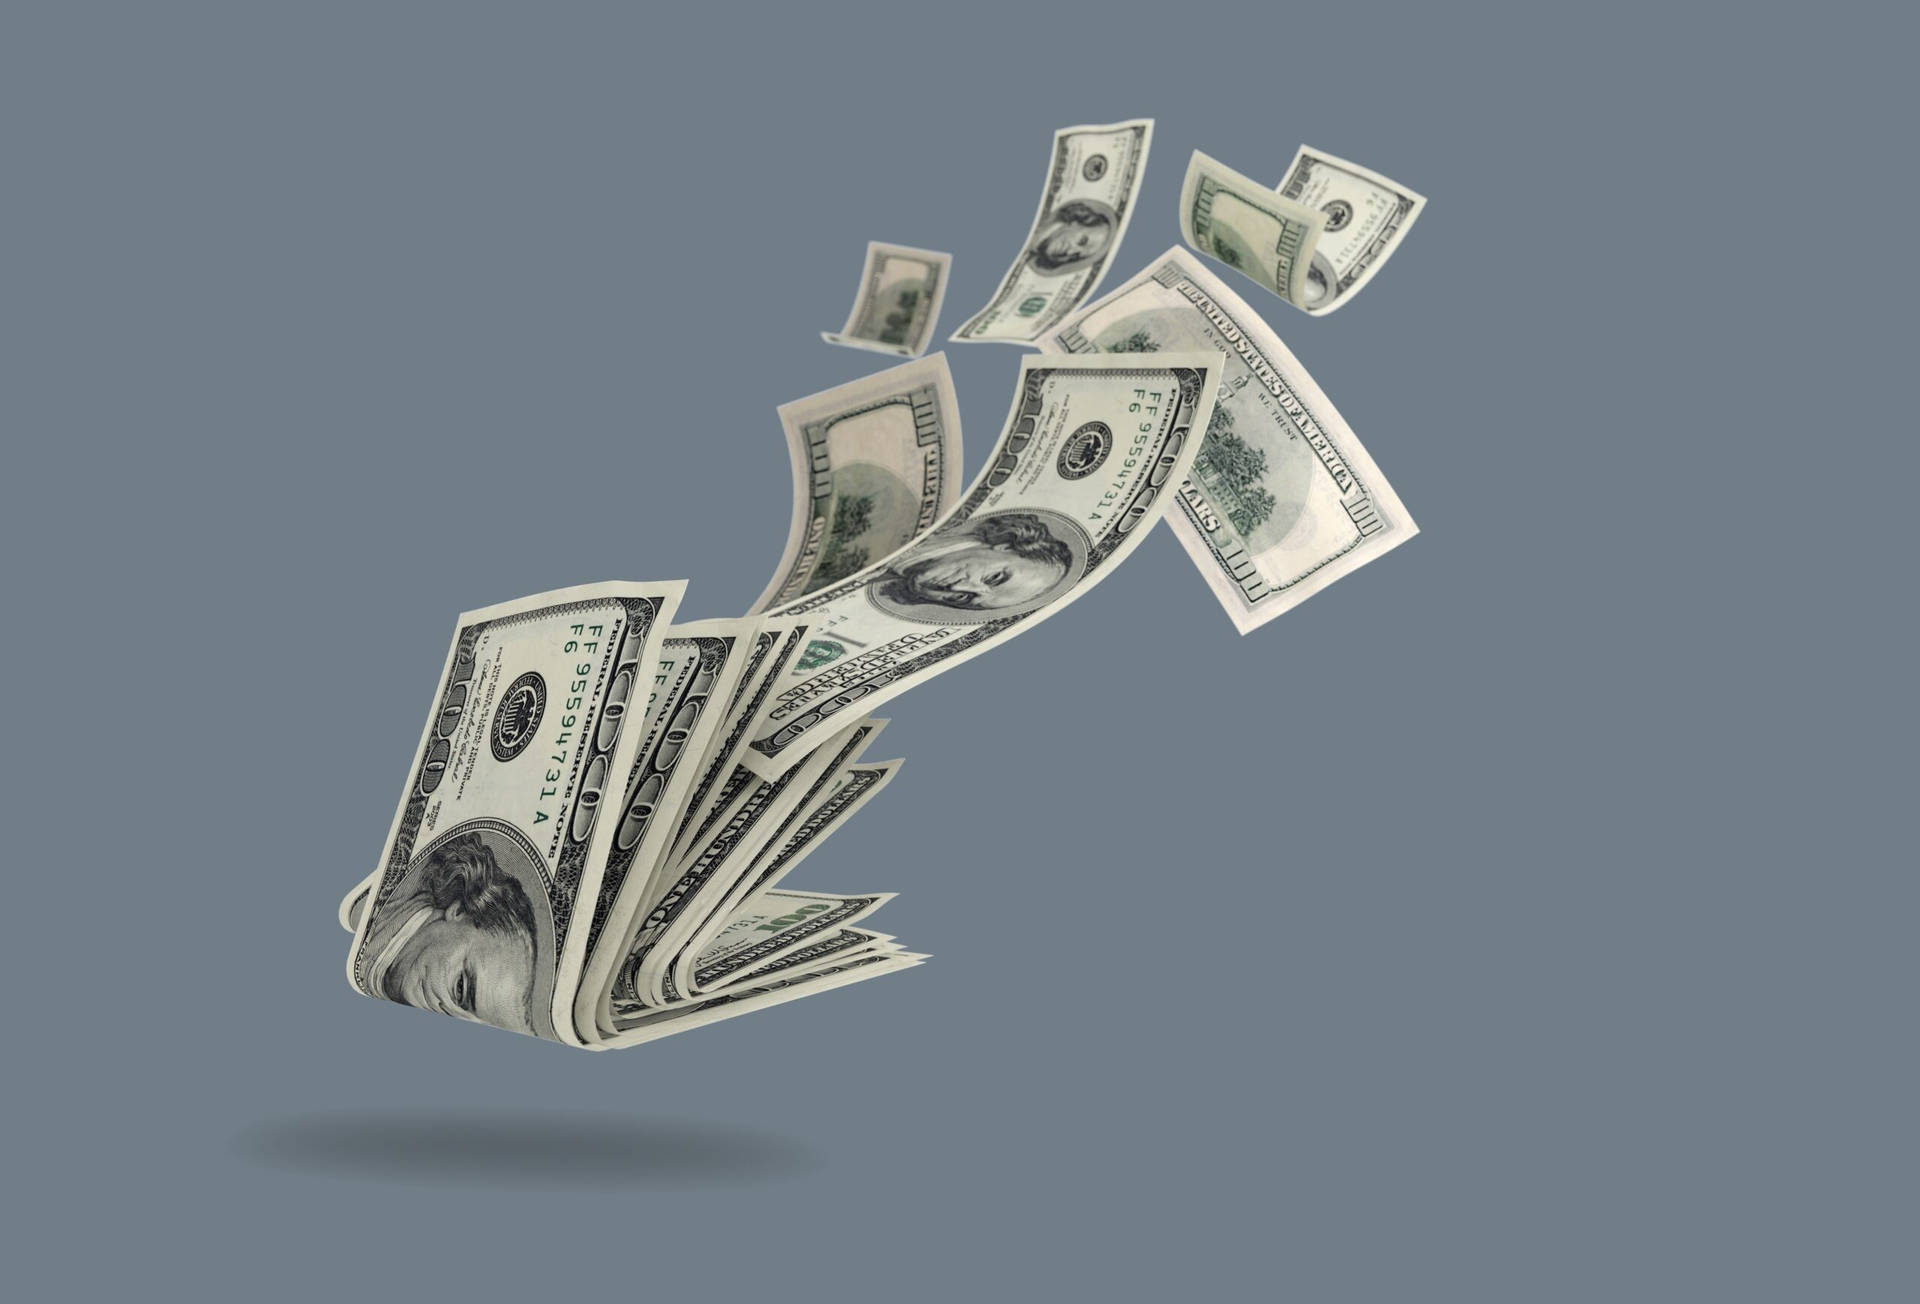 Free Money Wallpaper Downloads, [400+] Money Wallpapers for FREE |  